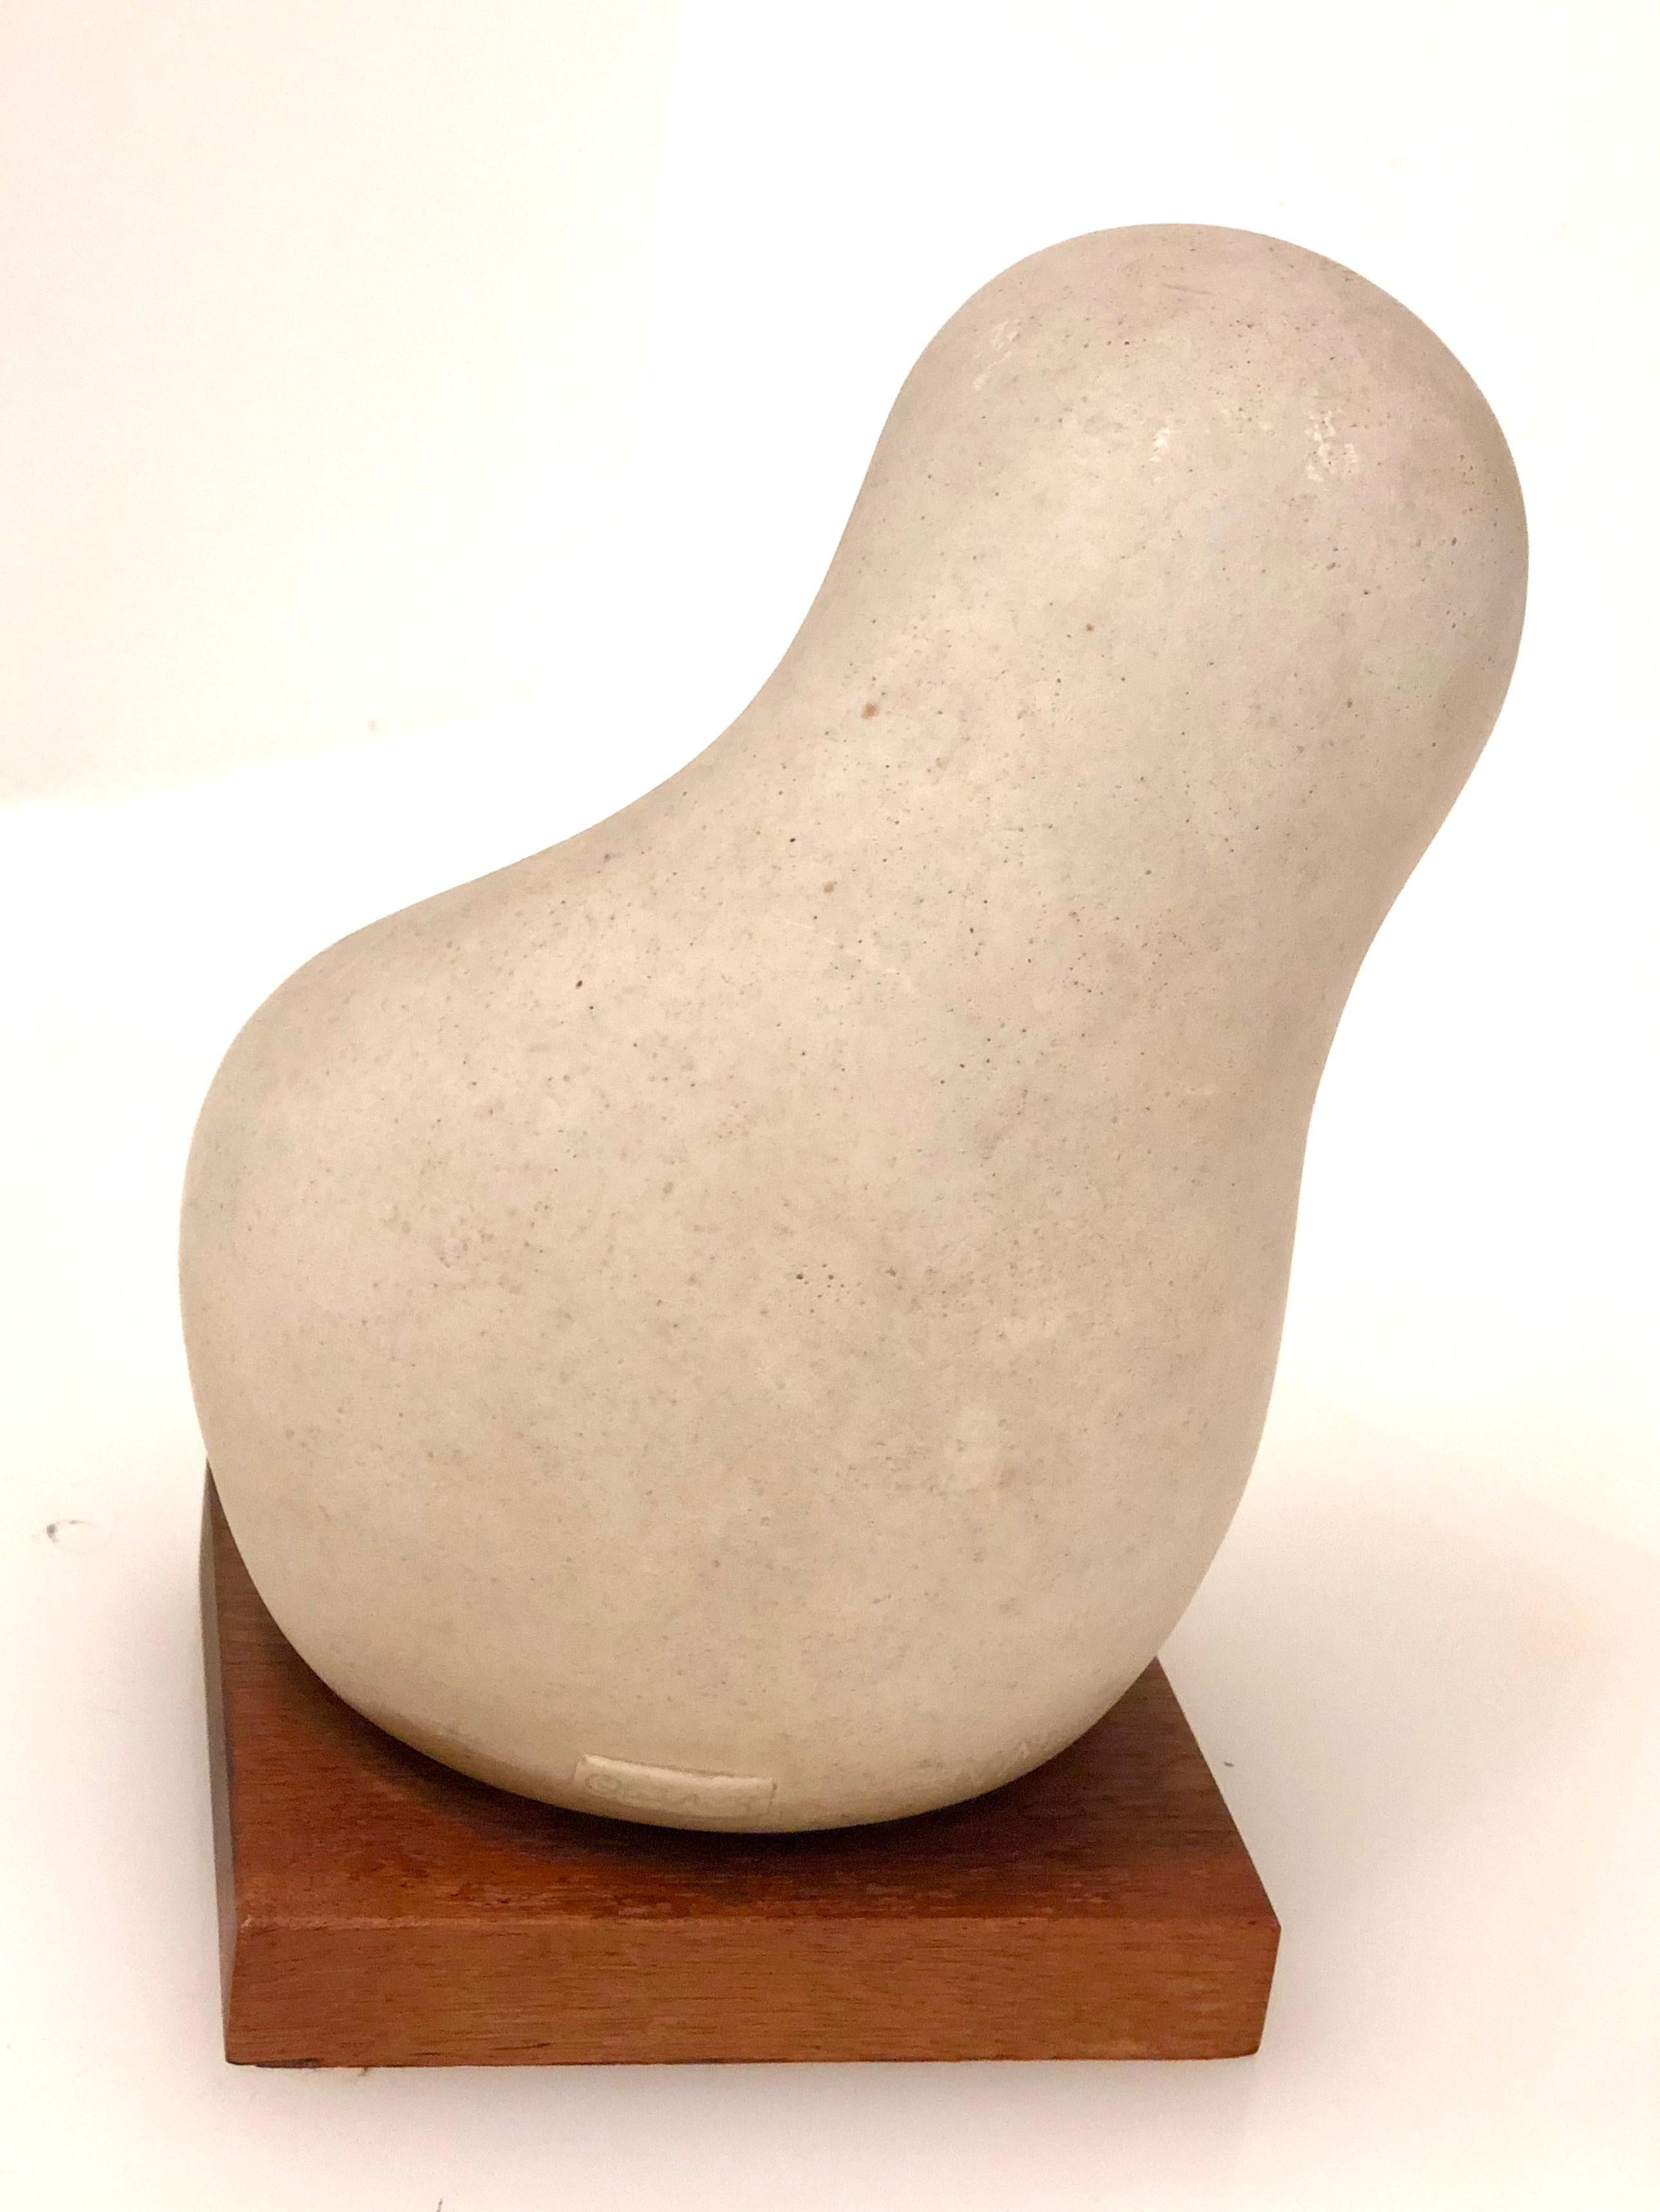 mother and child stone sculpture